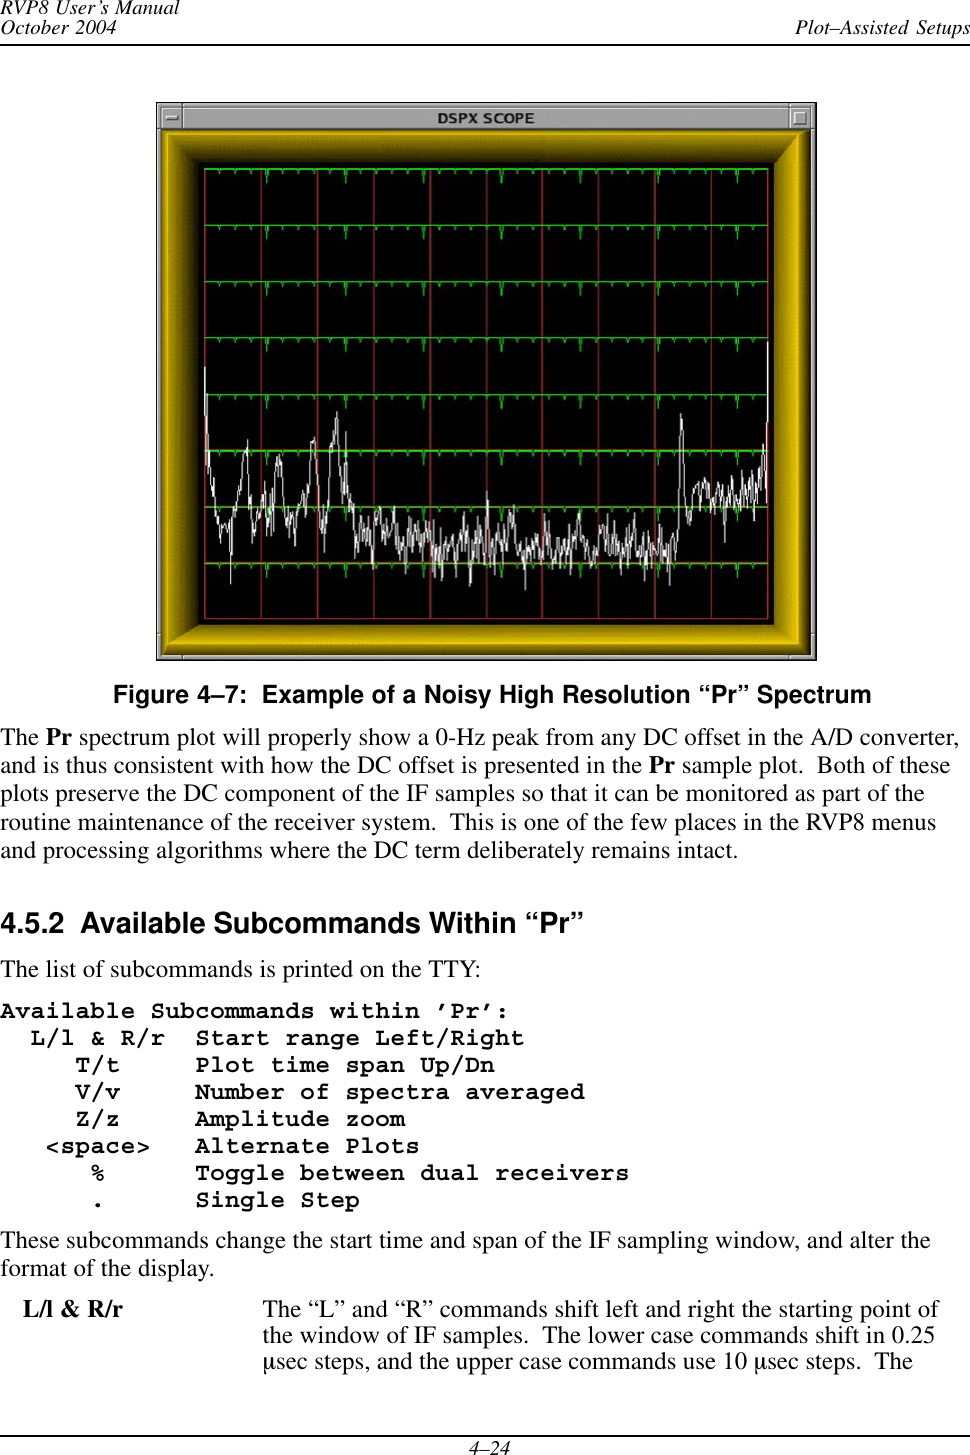 Plot–Assisted SetupsRVP8 User’s ManualOctober 20044–24Figure 4–7:  Example of a Noisy High Resolution “Pr” SpectrumThe Pr spectrum plot will properly show a 0-Hz peak from any DC offset in the A/D converter,and is thus consistent with how the DC offset is presented in the Pr sample plot.  Both of theseplots preserve the DC component of the IF samples so that it can be monitored as part of theroutine maintenance of the receiver system.  This is one of the few places in the RVP8 menusand processing algorithms where the DC term deliberately remains intact.4.5.2  Available Subcommands Within “Pr”The list of subcommands is printed on the TTY:Available Subcommands within ’Pr’:  L/l &amp; R/r  Start range Left/Right     T/t     Plot time span Up/Dn     V/v     Number of spectra averaged     Z/z     Amplitude zoom   &lt;space&gt;   Alternate Plots      %      Toggle between dual receivers      .      Single StepThese subcommands change the start time and span of the IF sampling window, and alter theformat of the display.L/l &amp; R/r The “L” and “R” commands shift left and right the starting point ofthe window of IF samples.  The lower case commands shift in 0.25msec steps, and the upper case commands use 10 msec steps.  The